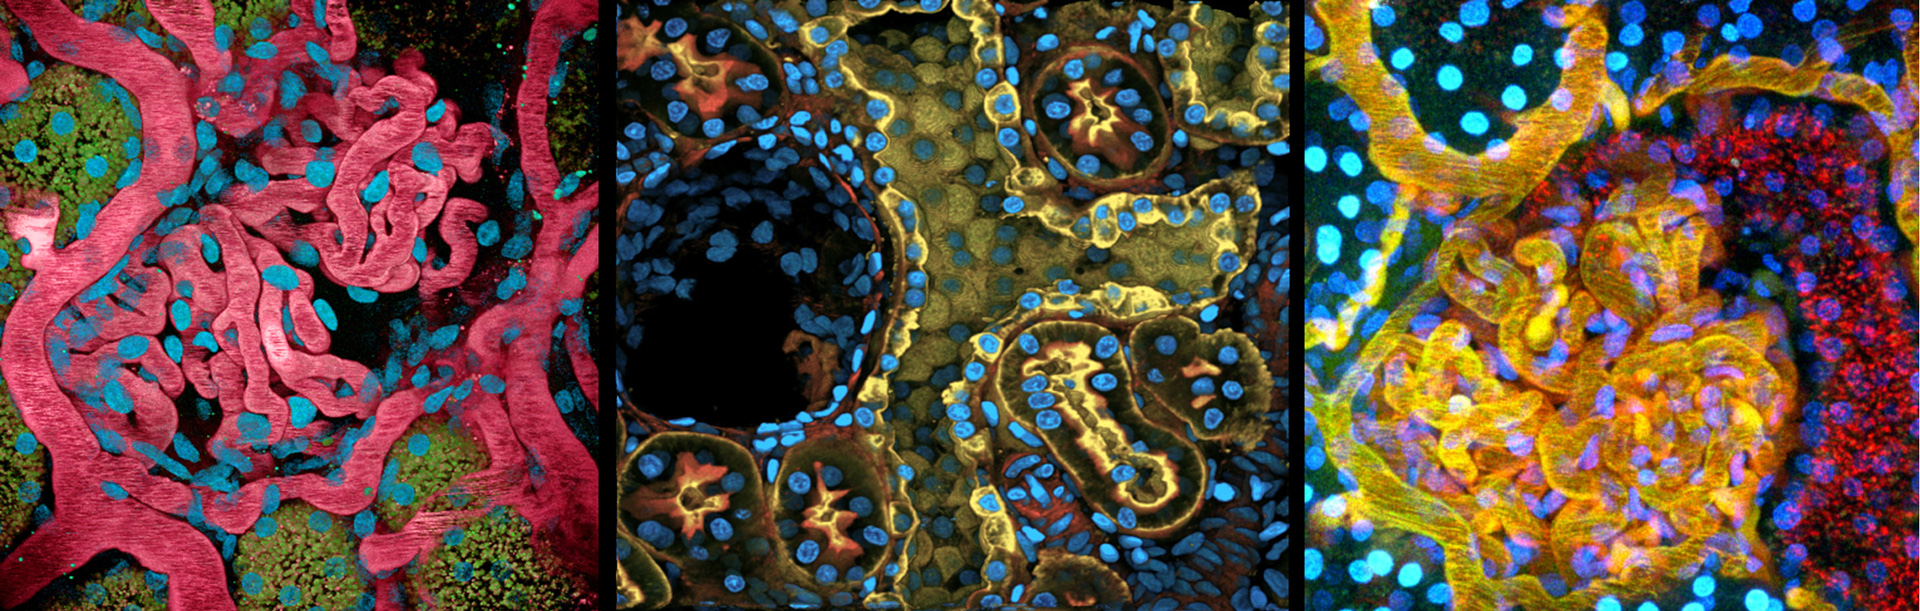 microscopy images from the obrien center